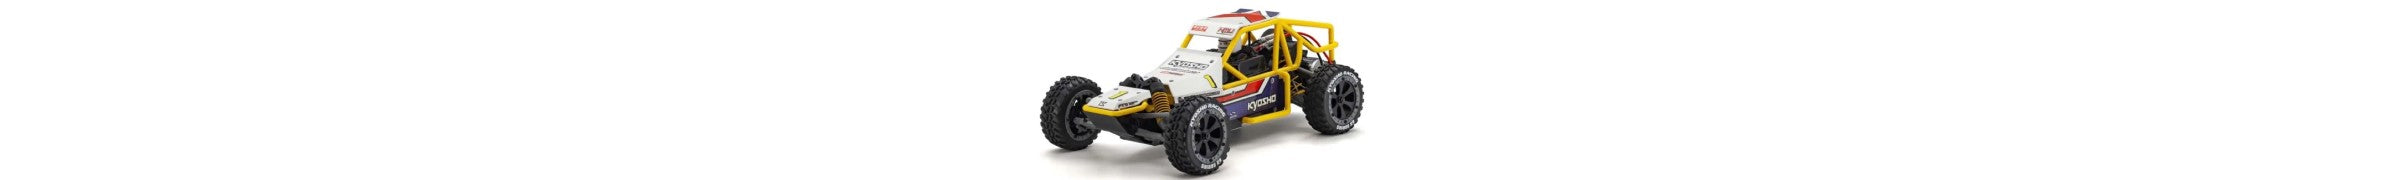 Spare Parts for Kyosho 1/10 2WD Sand Master 2.0 RC Buggy EZ Series Readyset White and Blue 34405